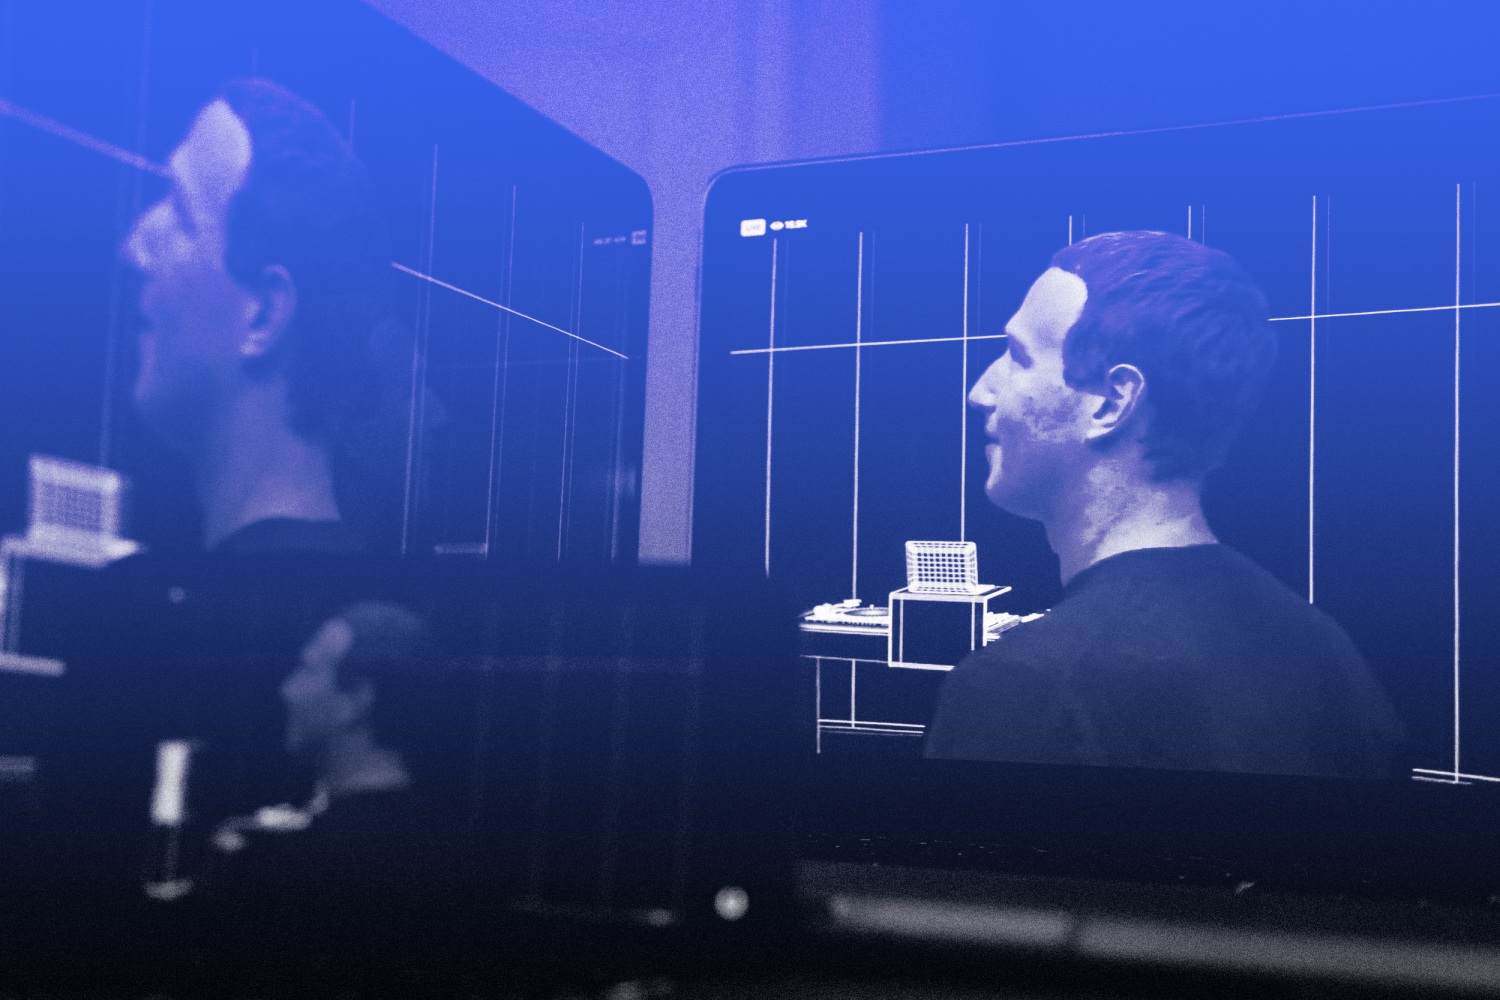 Facebook's metaverse gambit is a distraction from its deep-seated problems